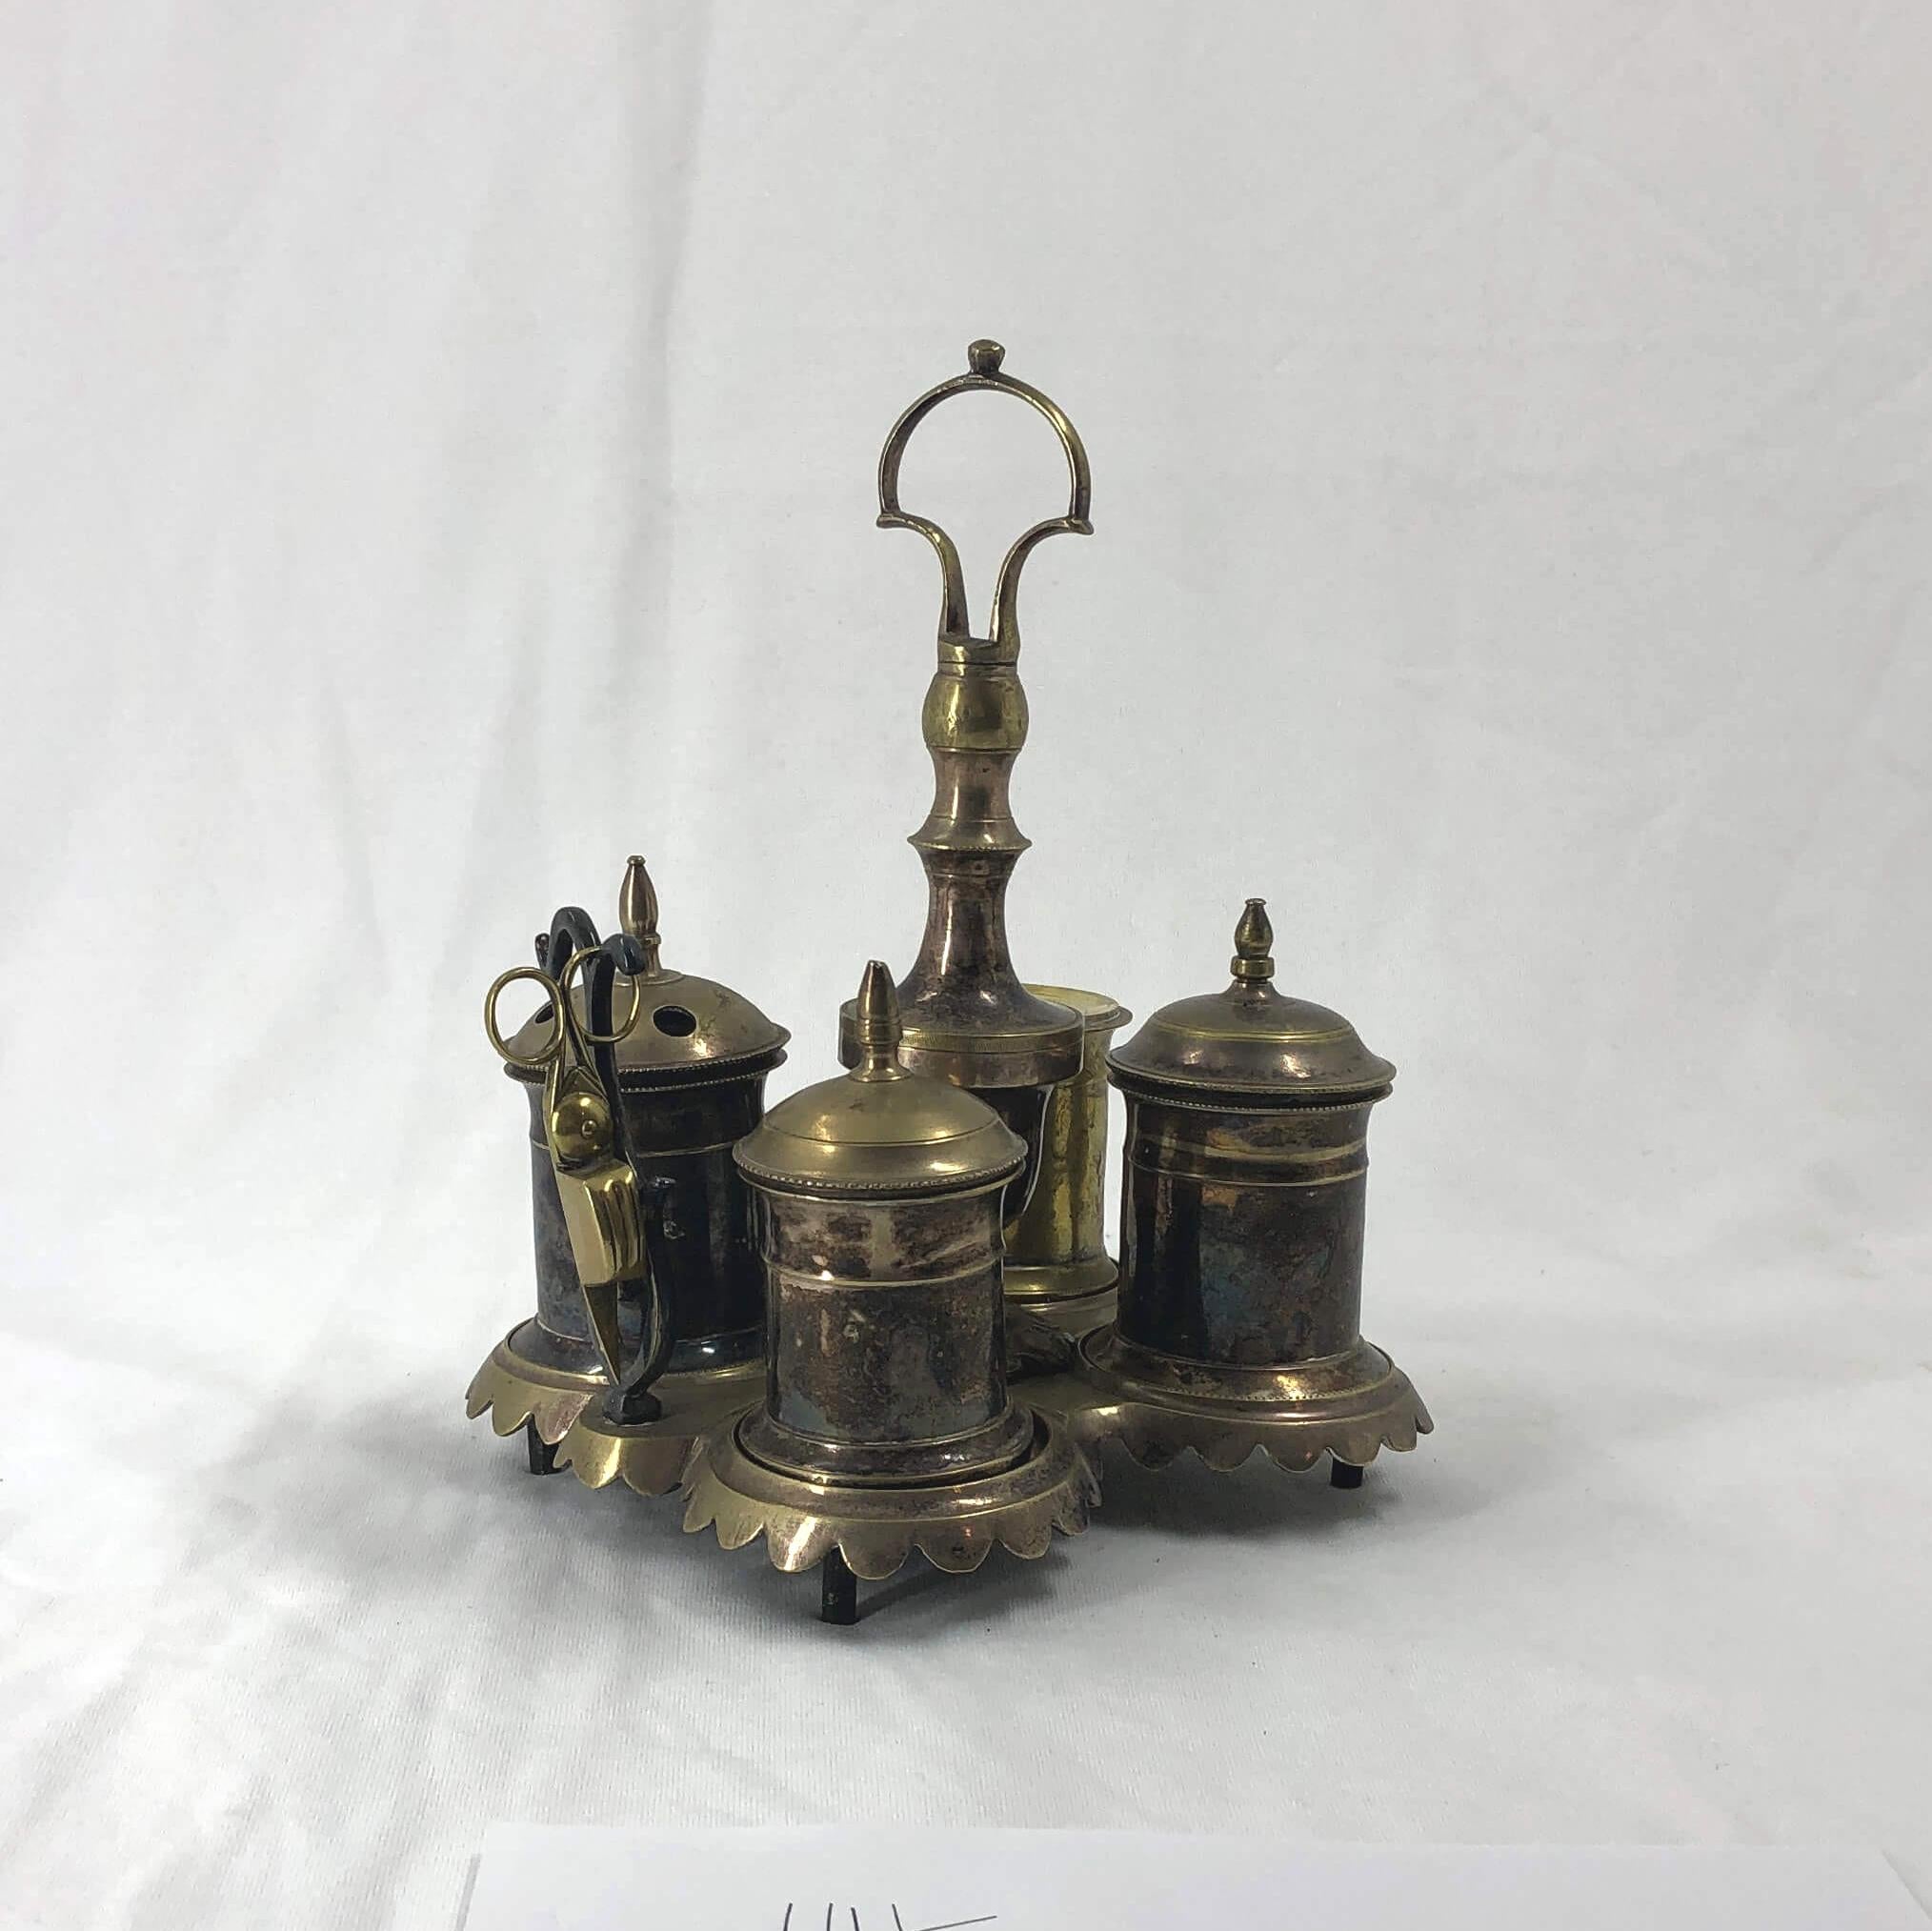 An early silvered brass four-piece Standish with a scalloped edge base and handle.